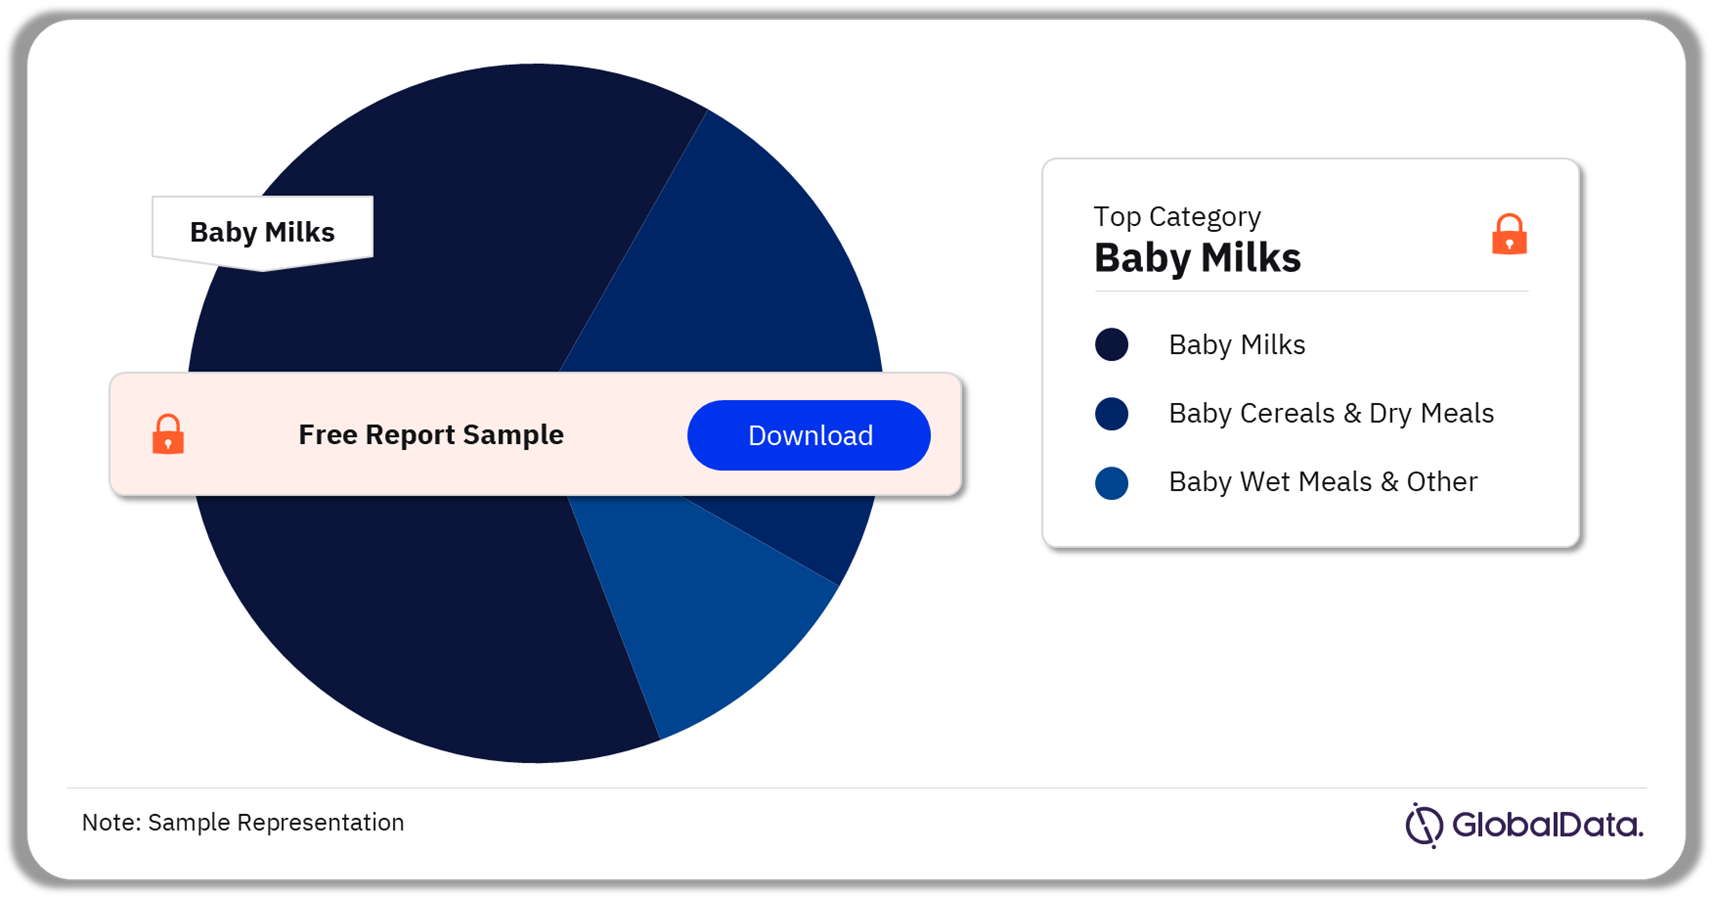 Baby milks accounted for the largest Morocco baby food market value in 2021